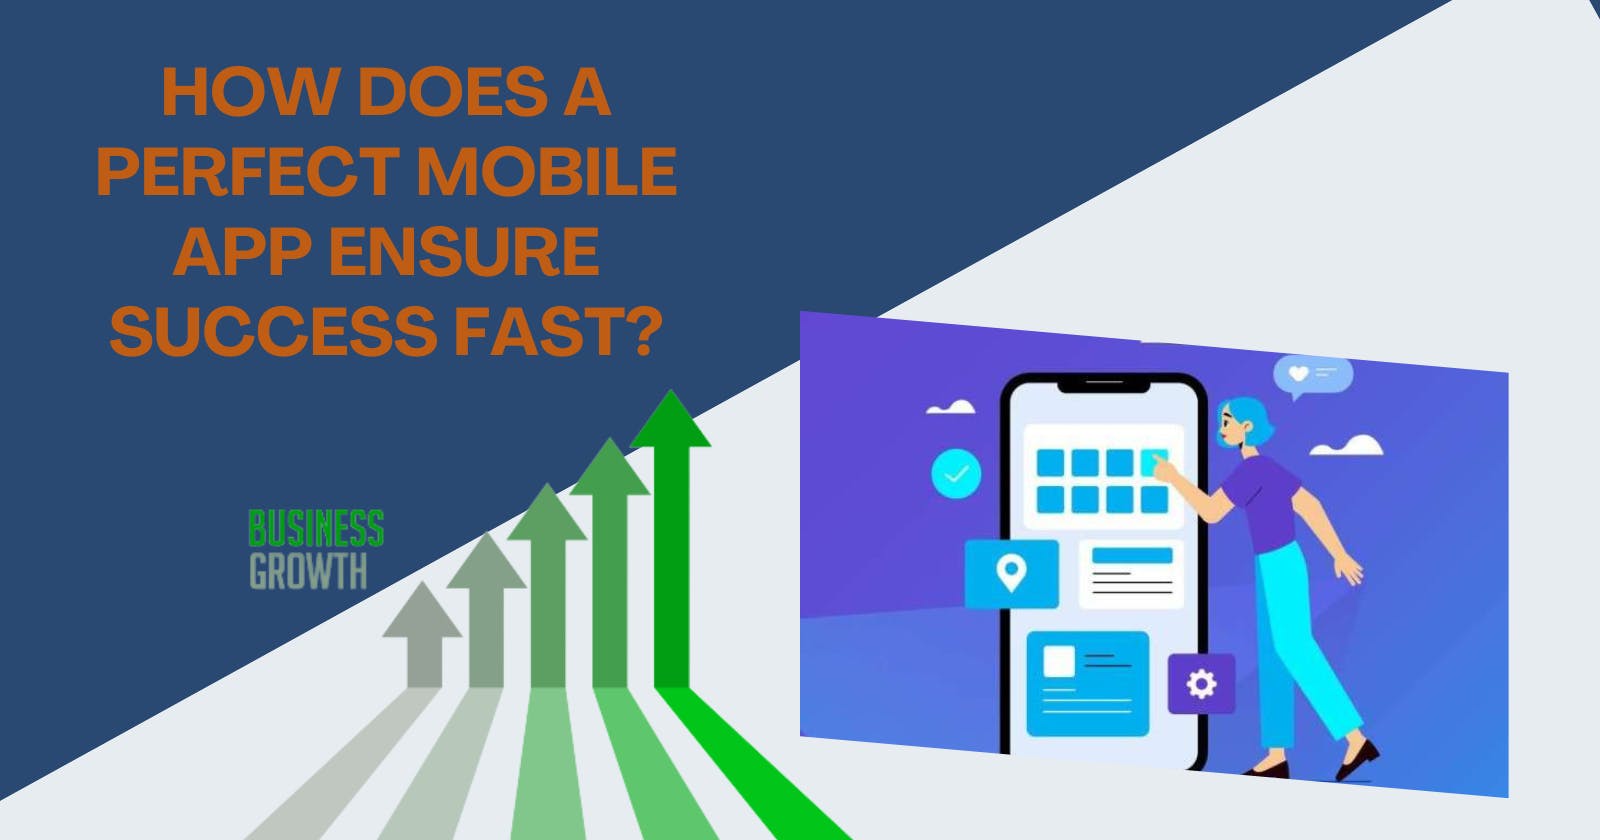 How does a perfect mobile app ensure success fast?